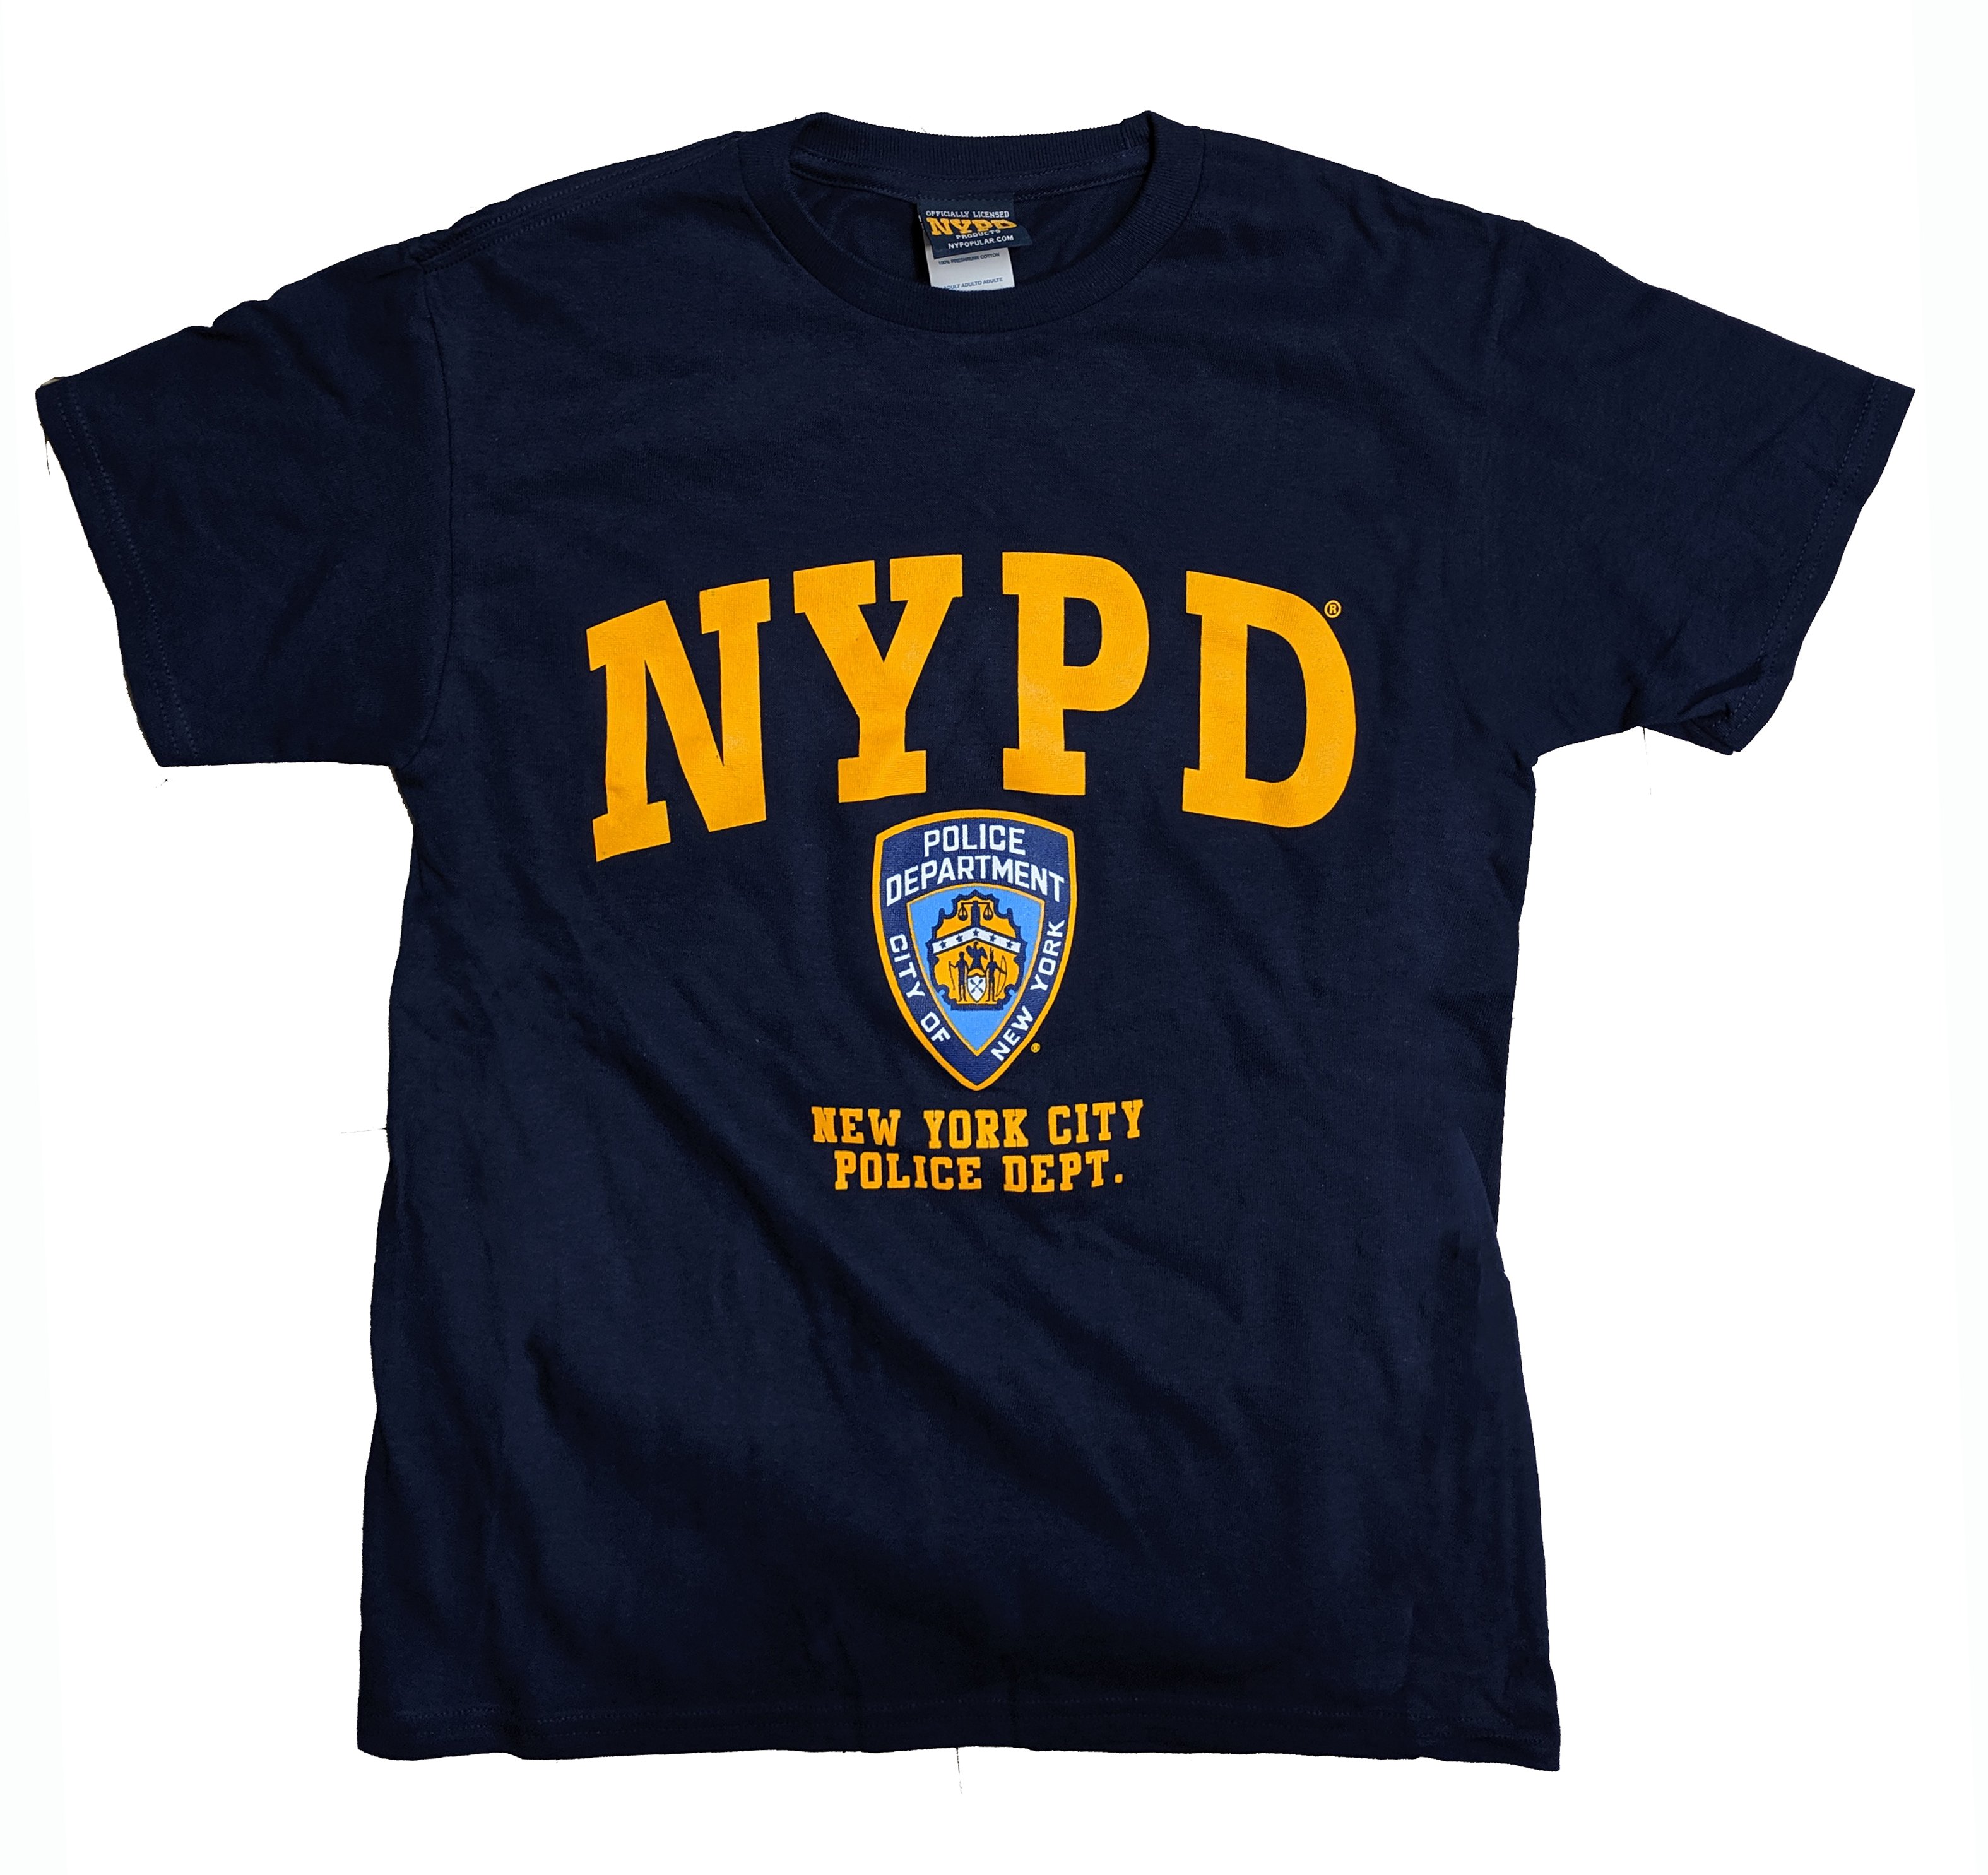 NYPD Kids Tee - Officially Licensed Boys Youth Police T-Shirt